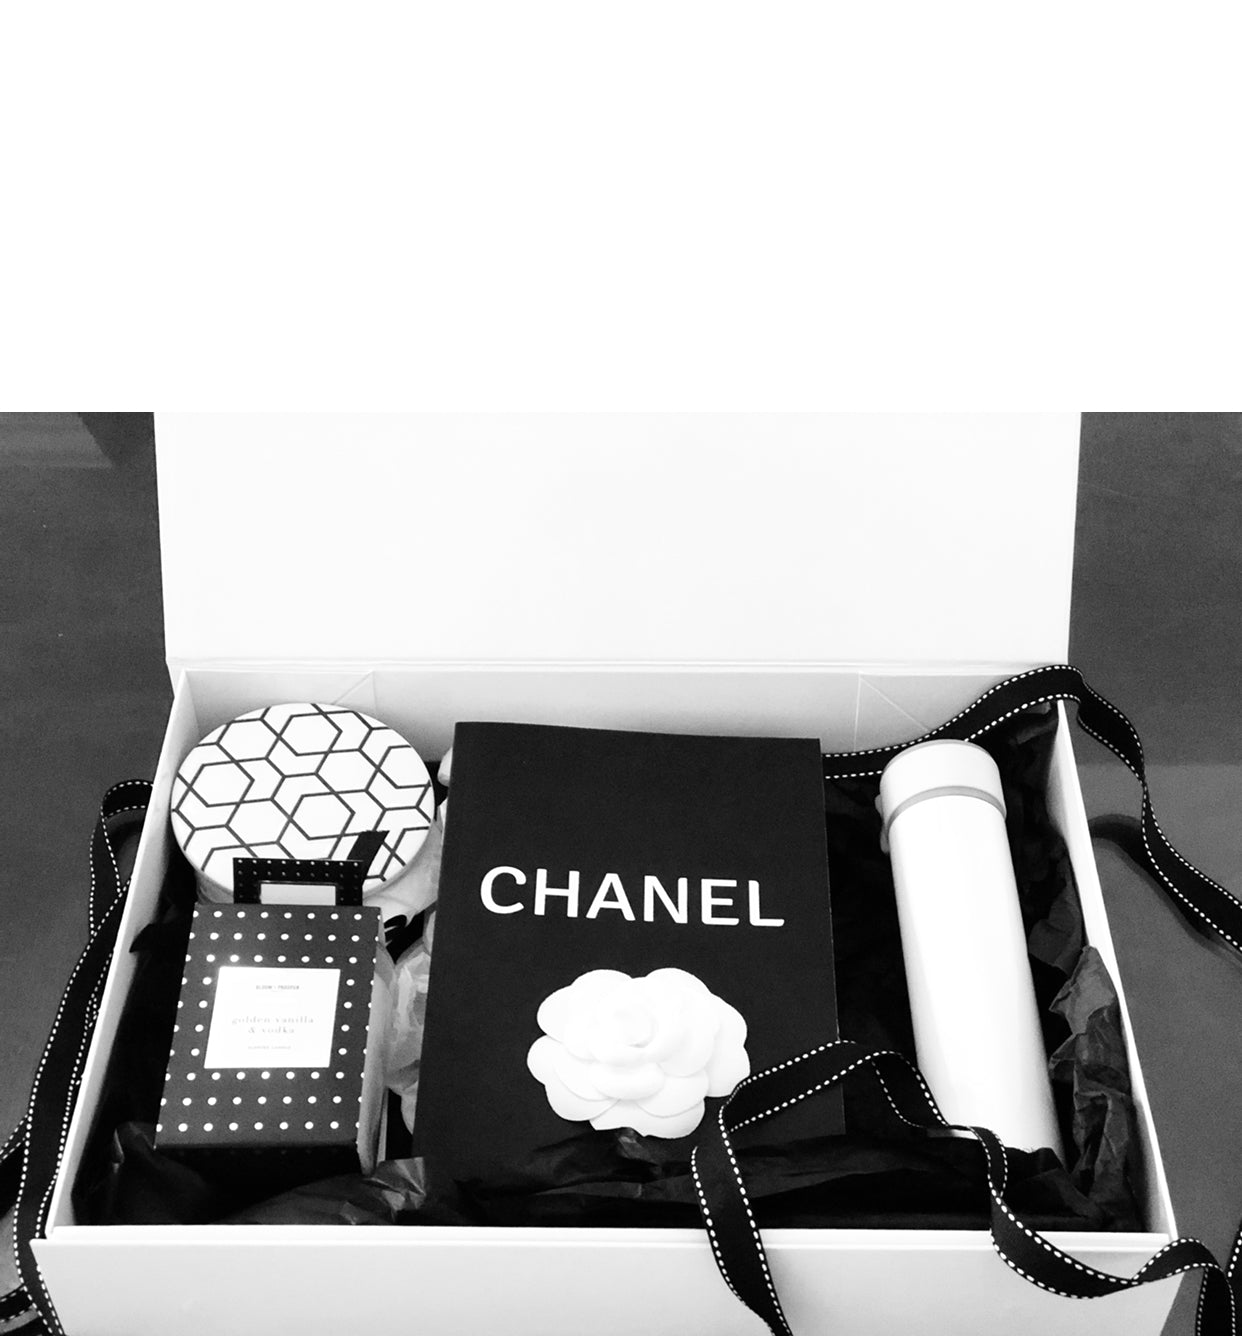 chanel gift packaging